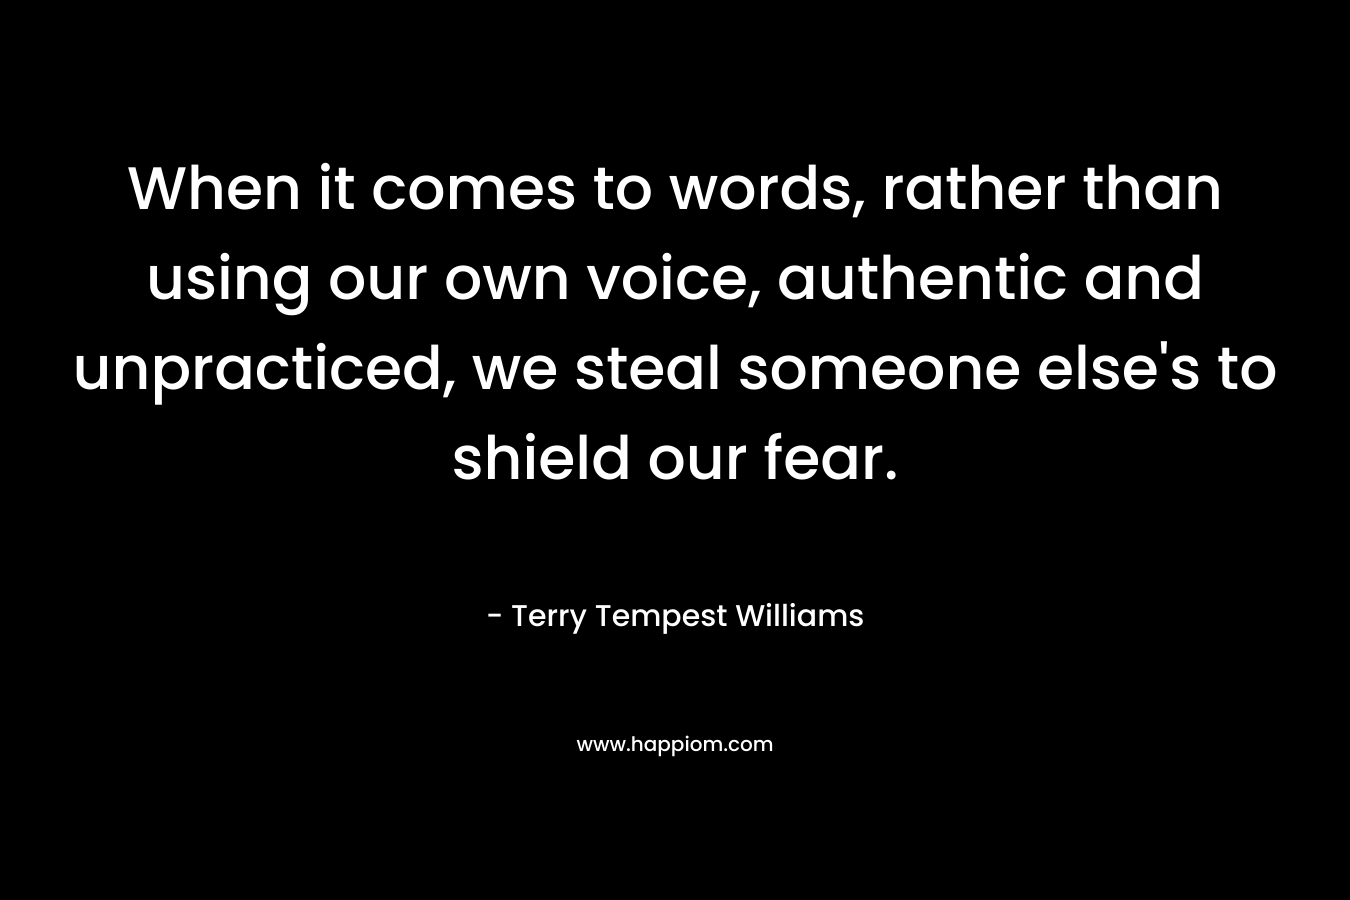 When it comes to words, rather than using our own voice, authentic and unpracticed, we steal someone else’s to shield our fear. – Terry Tempest Williams